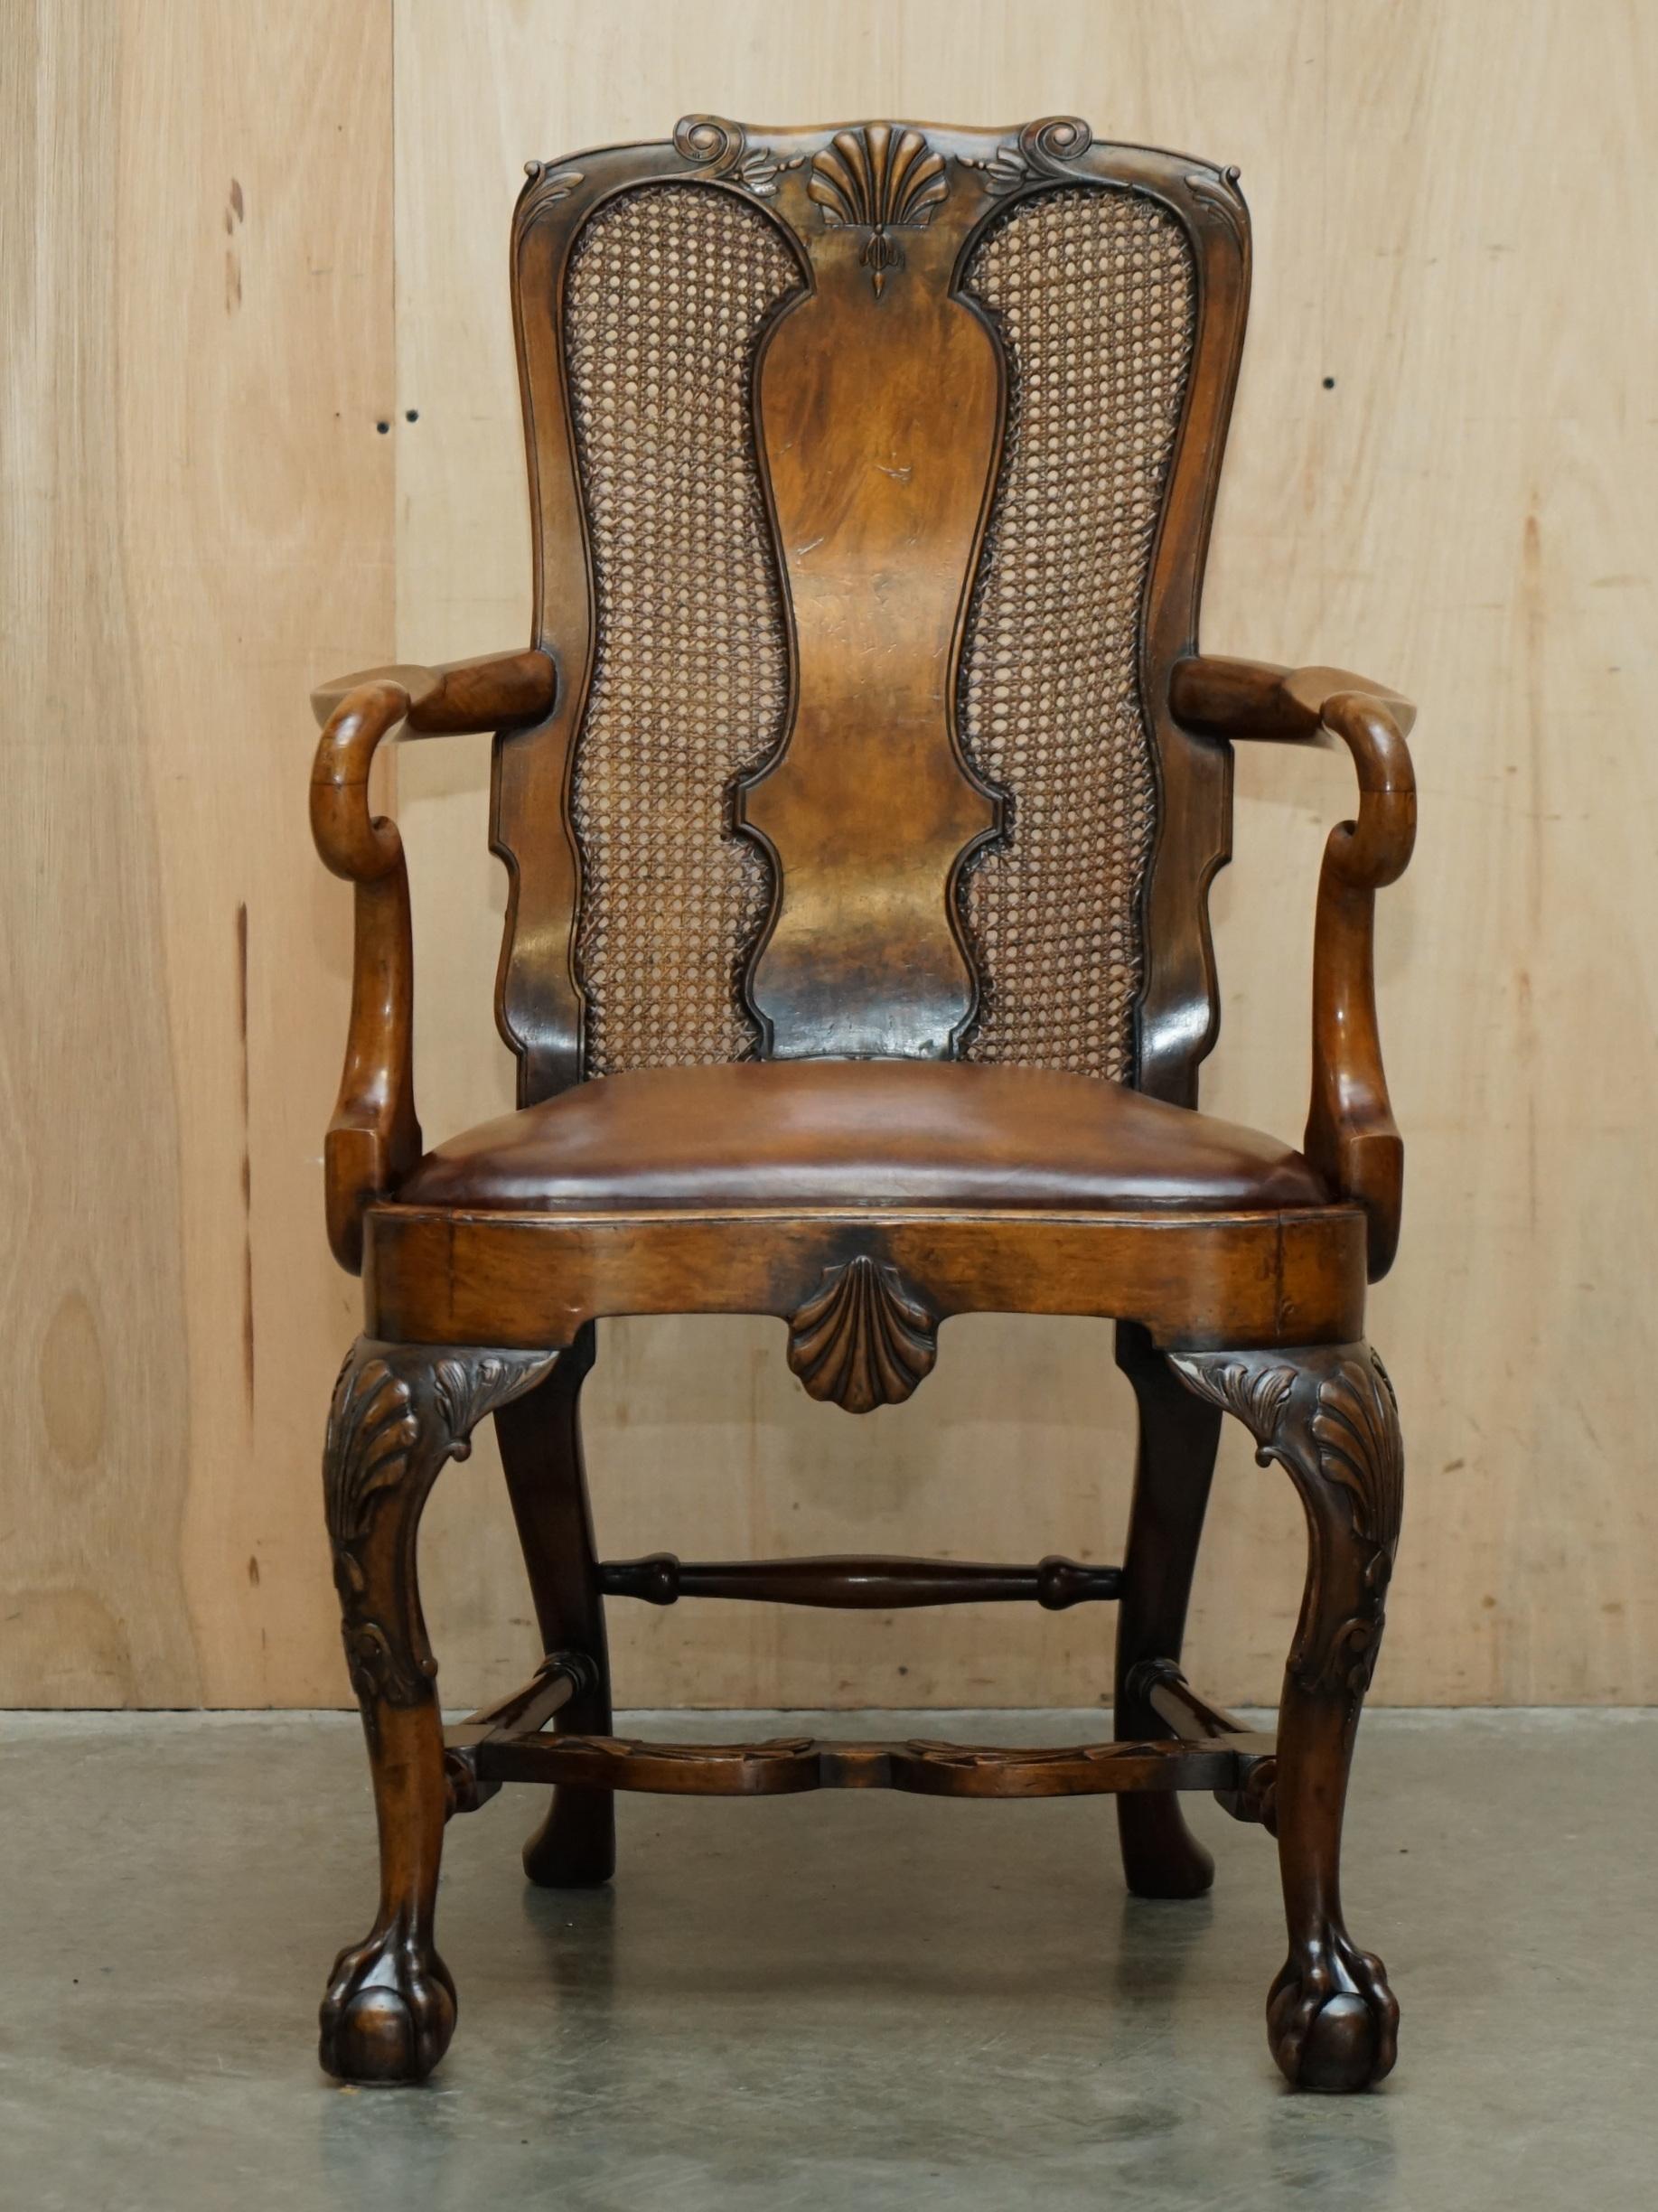 Royal House Antiques

Royal House Antiques is delighted to offer for sale this very rare and highly collectable, Circa 1900-1920 Thomas Chippendale style carved with Claw & Ball feet and hand dyed brown leather seat armchair 

Please note the